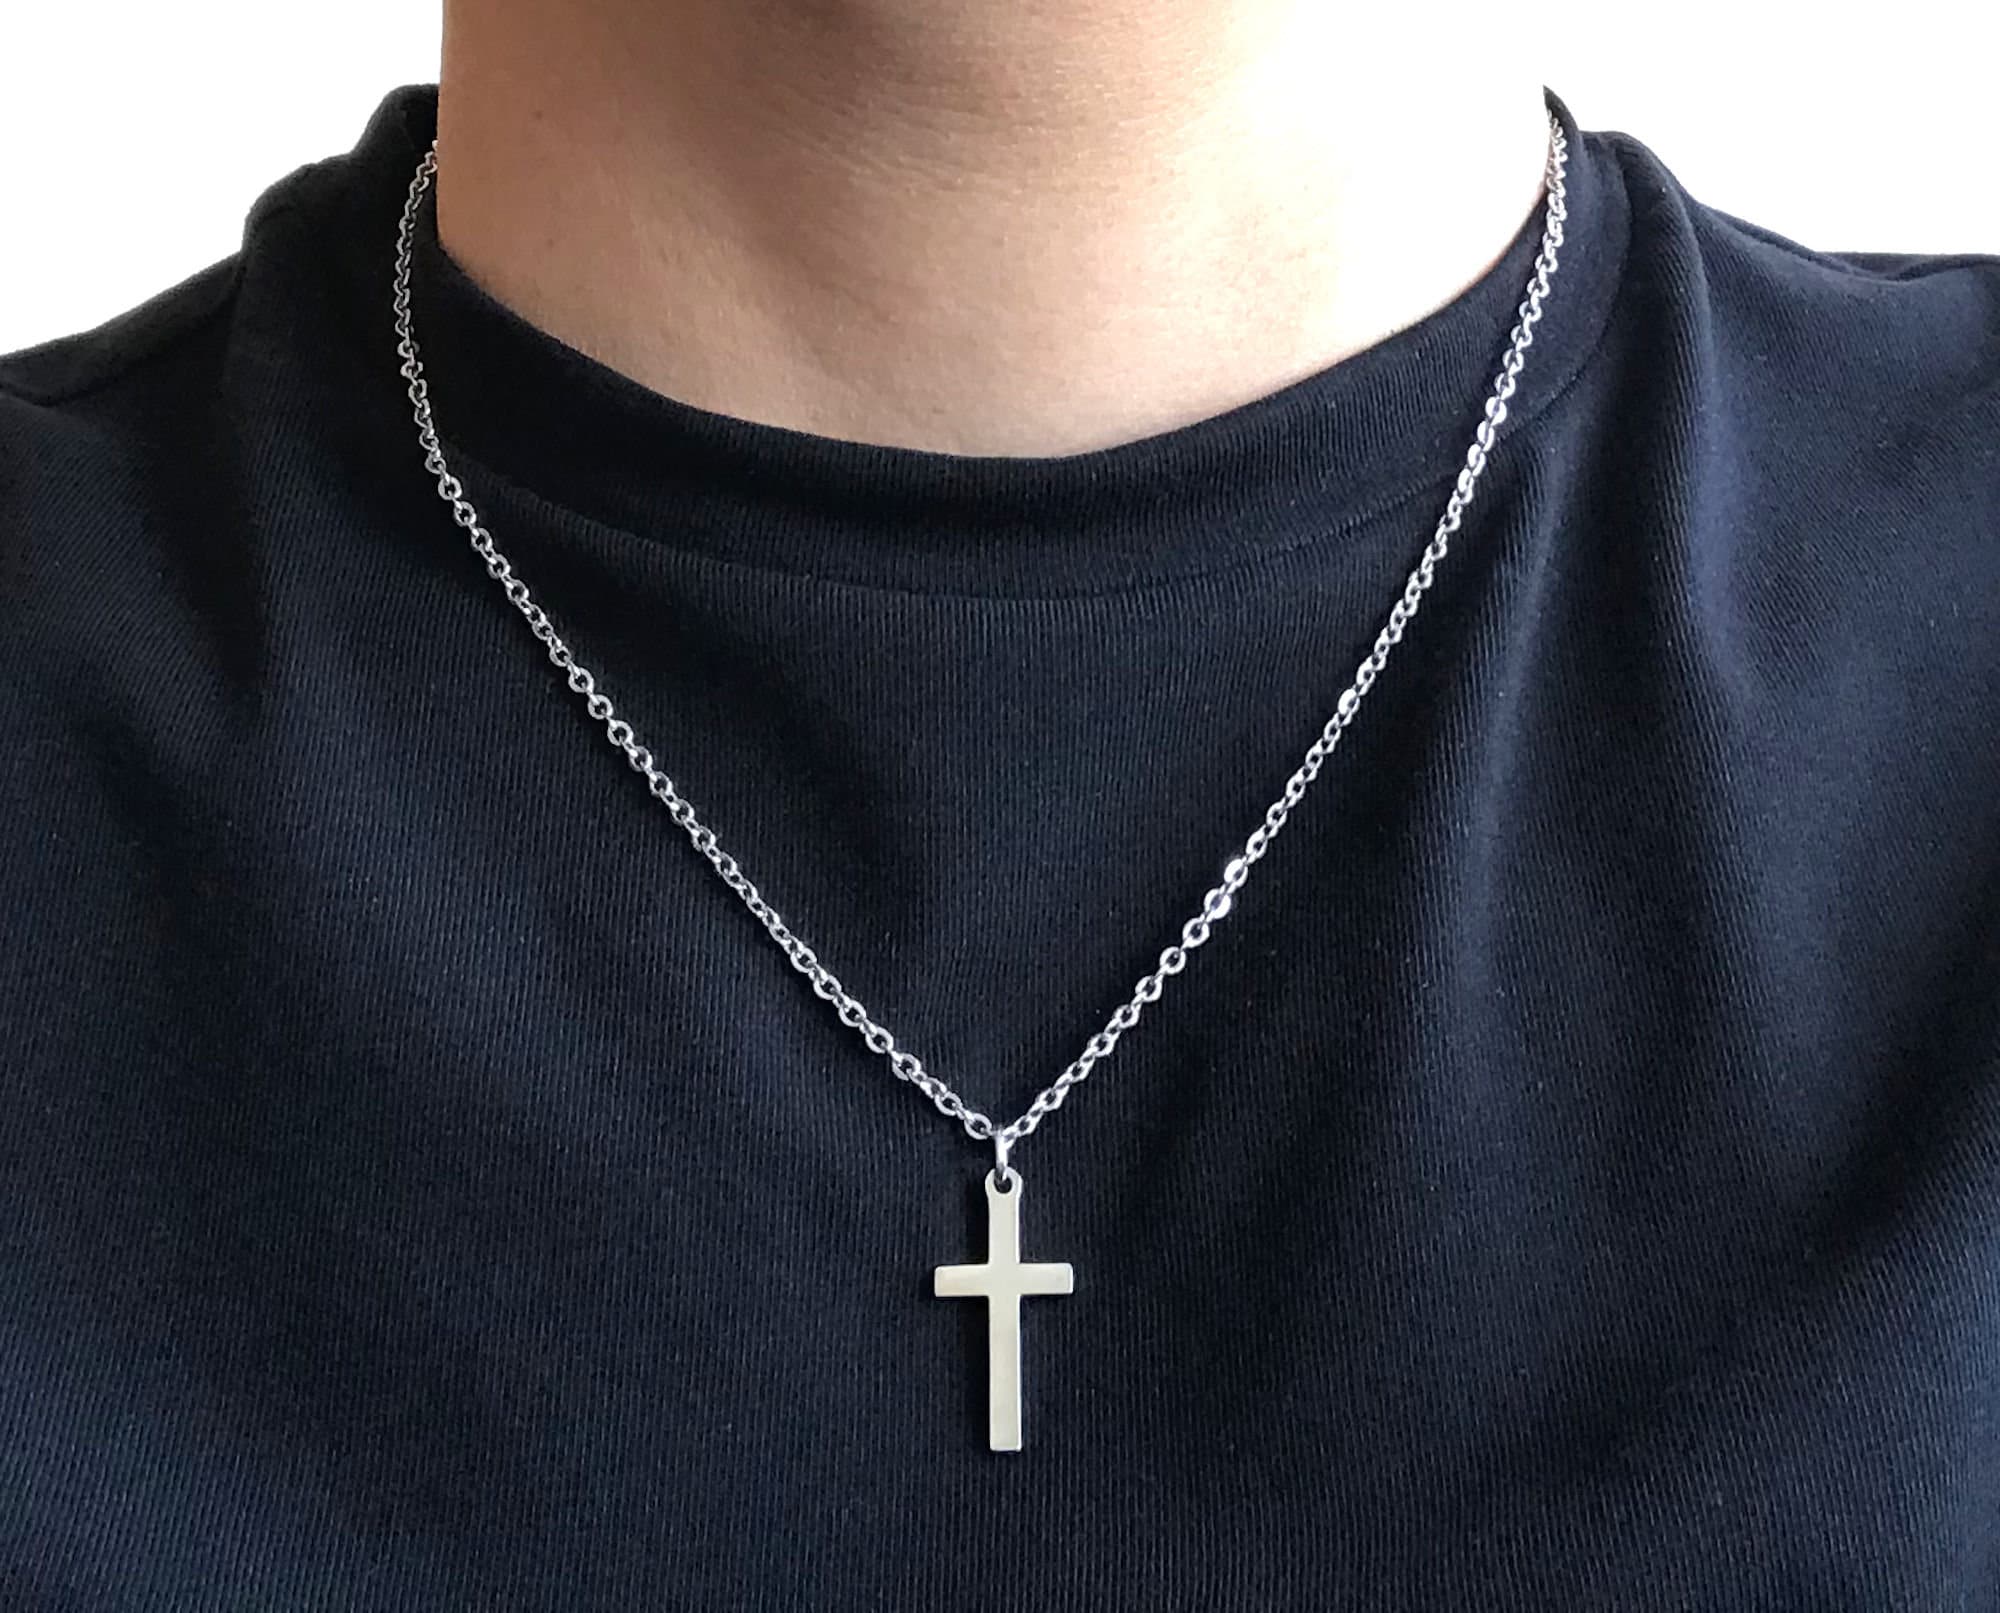 WEDDINEN Stainless Steel Cross Necklace for Men Boys Large Christian Silver Cross  Chain Pendant Cool Necklace 24